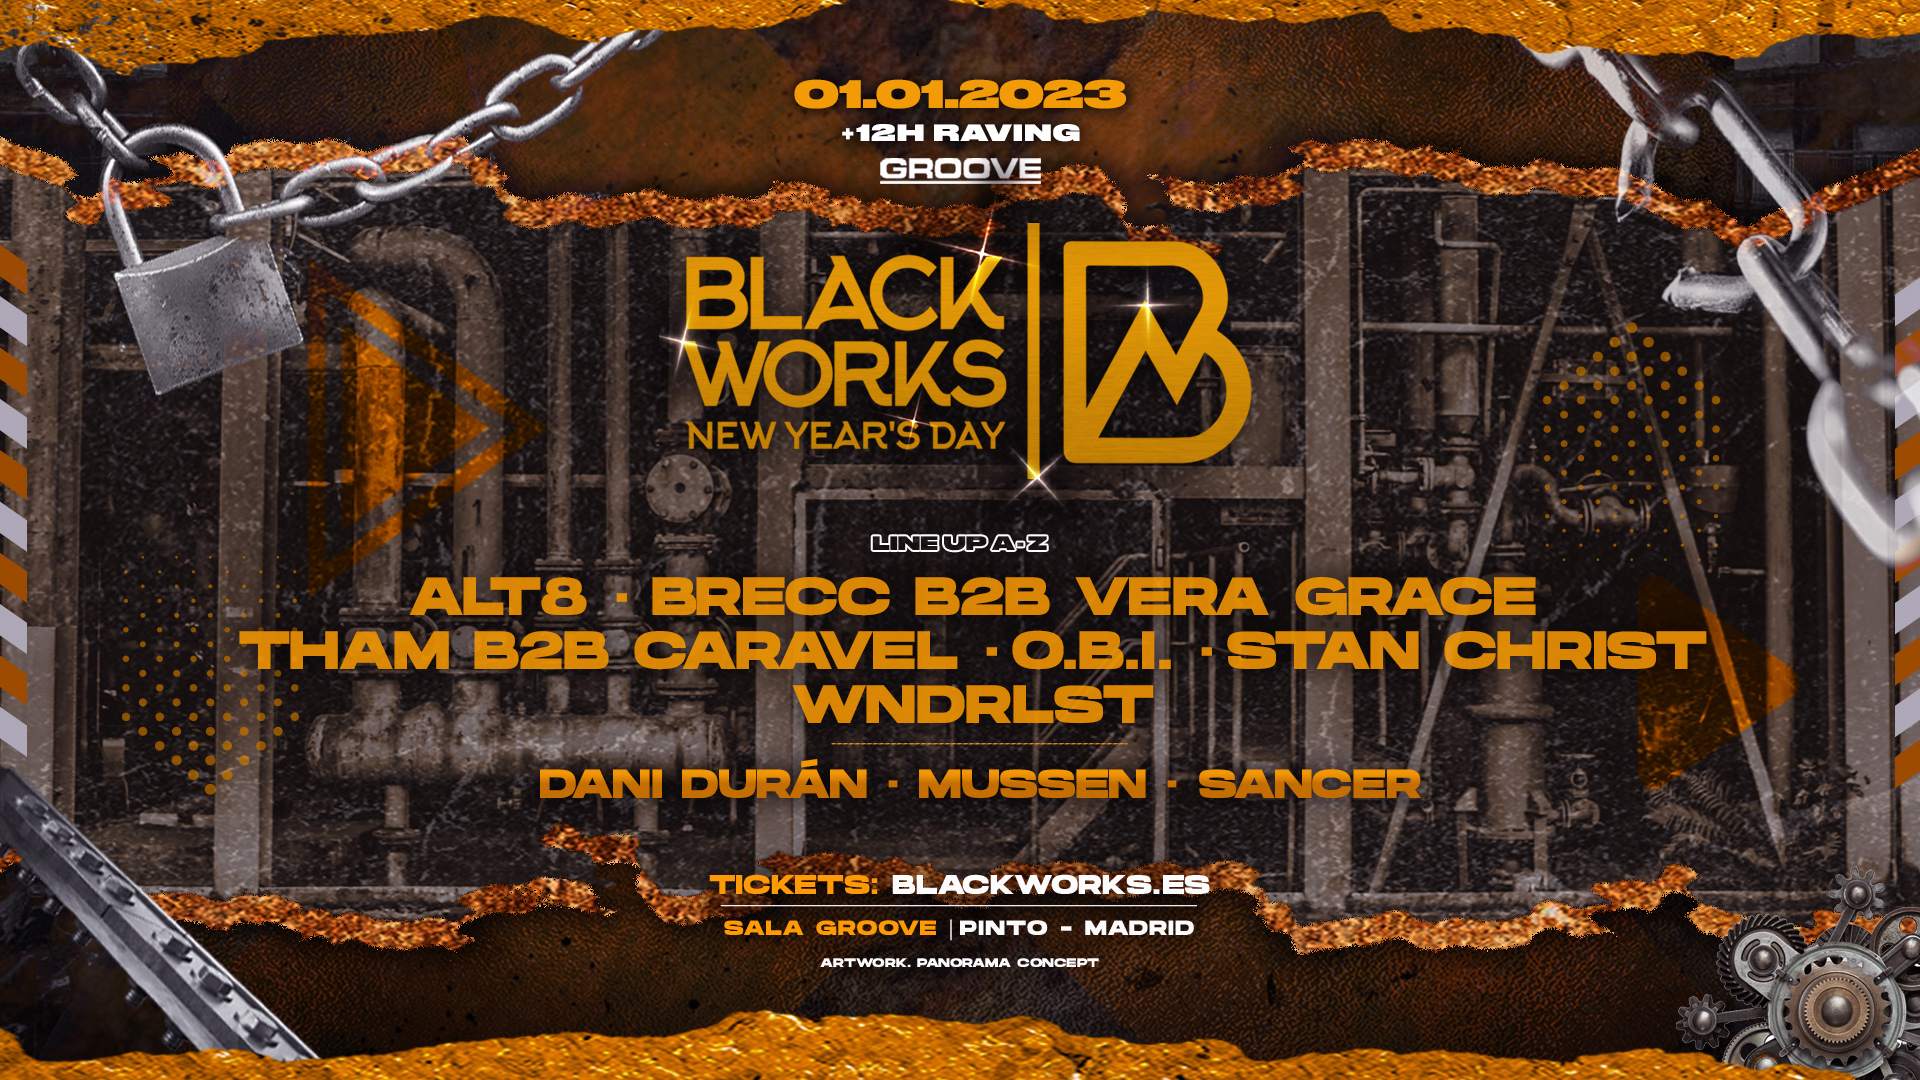 BlackWorks New Years Day at Sala Groove, Madrid